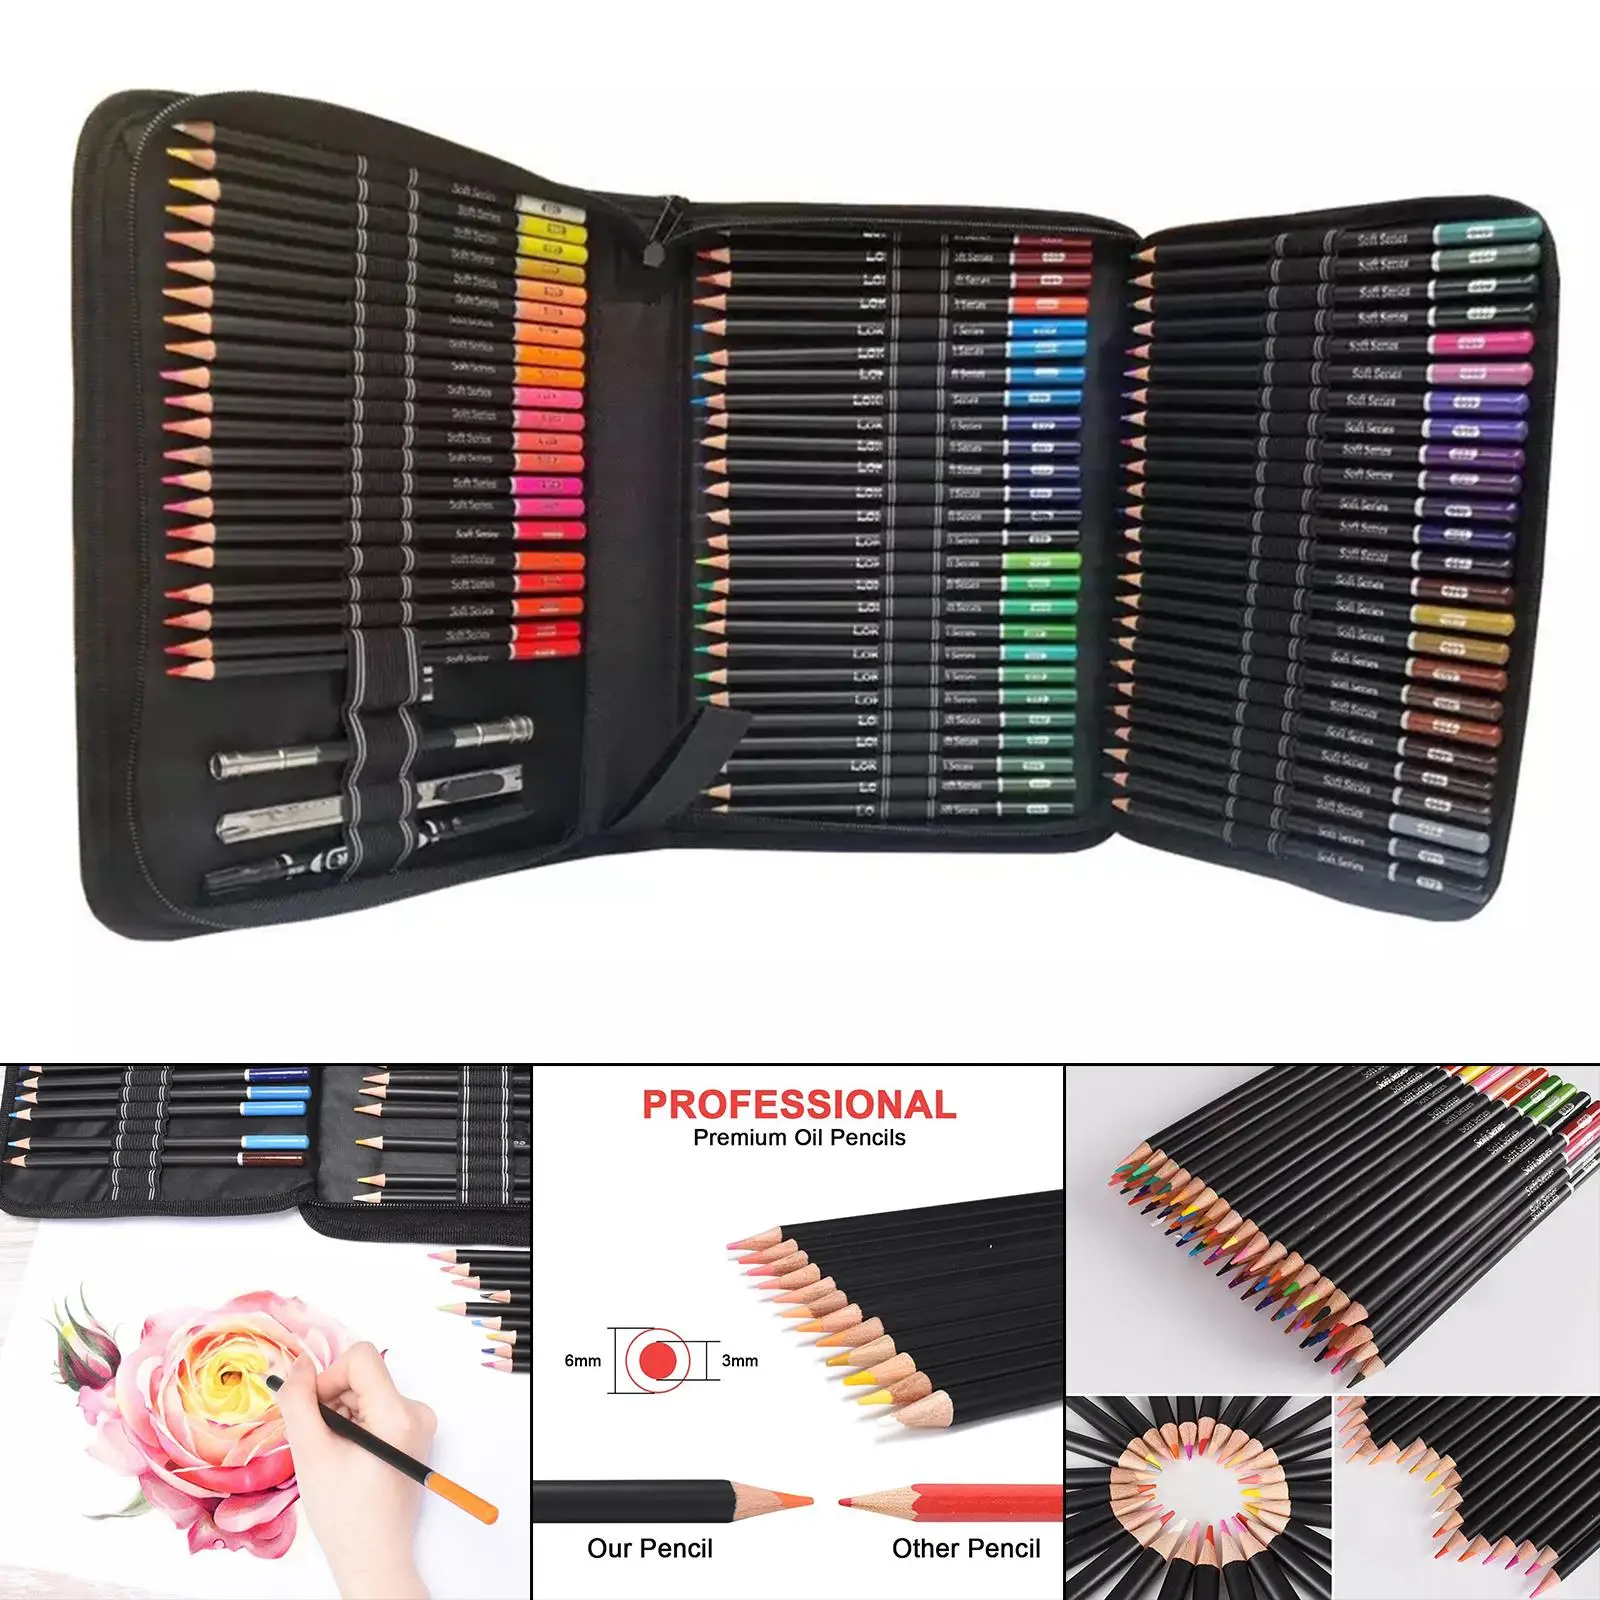 Professional 72 Oil Colored Pencils with Pencil Extender Supplies Crafting Beginner Drawing Shading Colouring